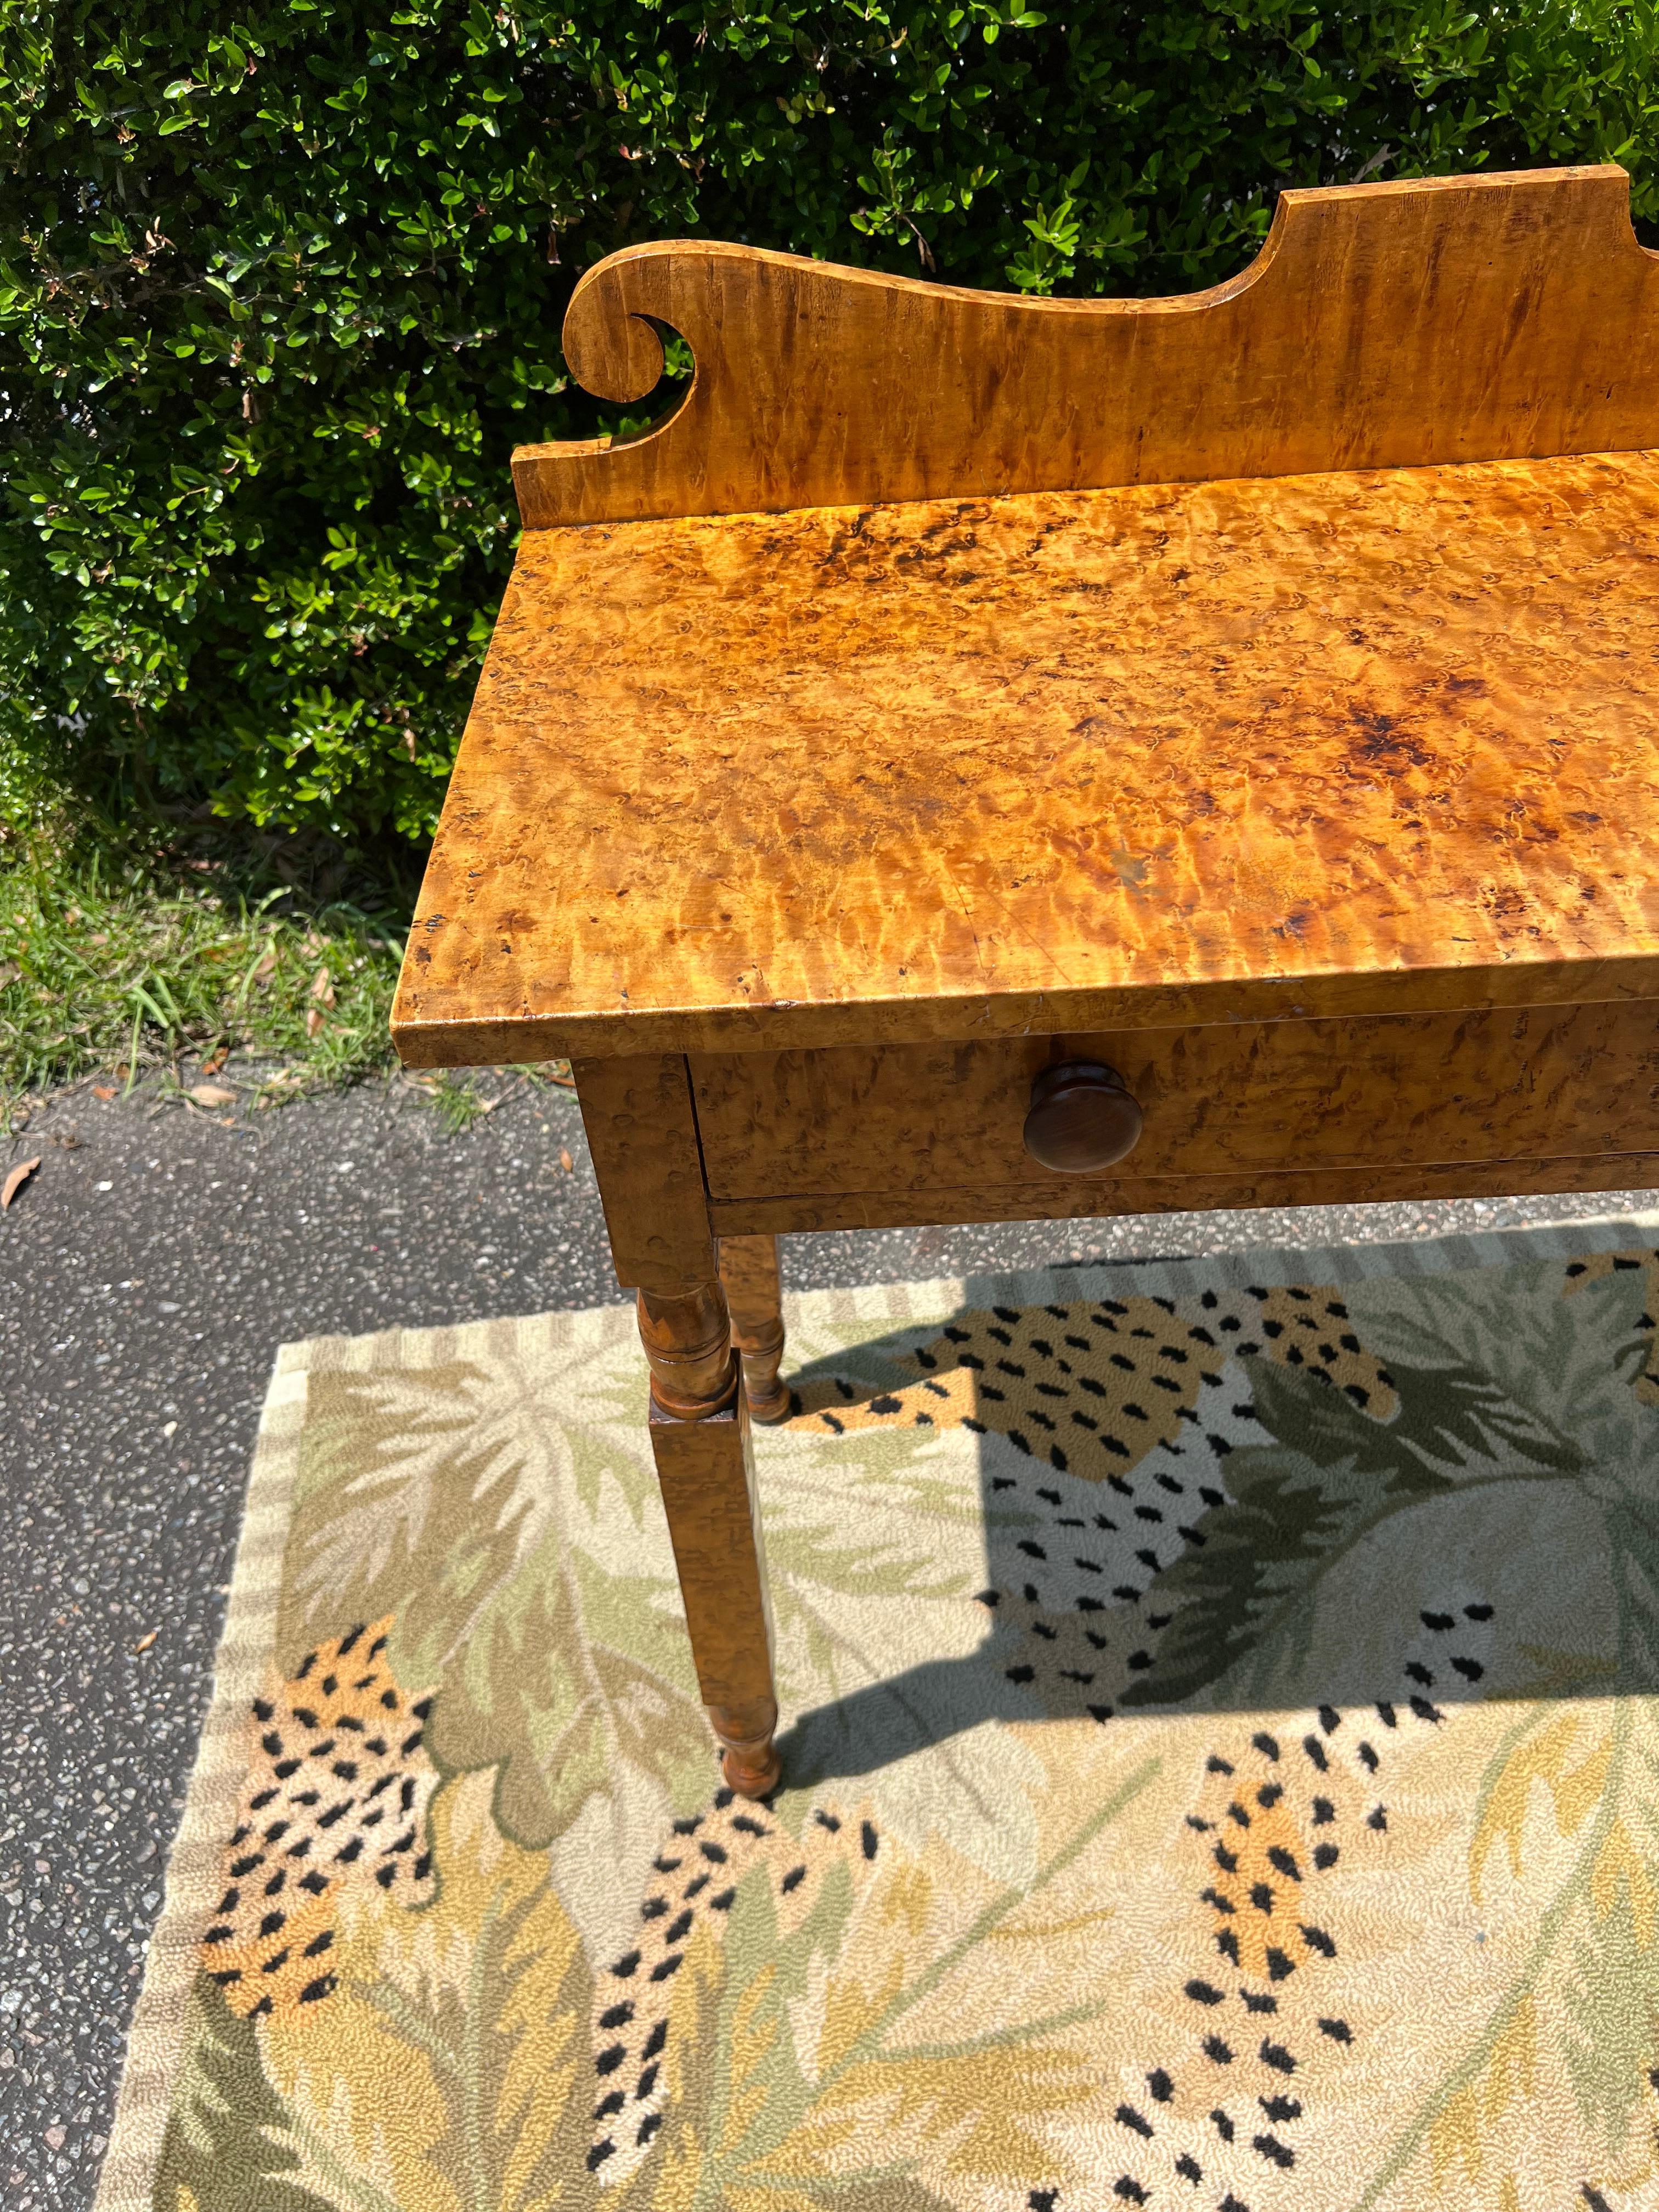 American Empire 19th Century Well Figured Tiger Maple Desk With Chair - a Set of 2 For Sale